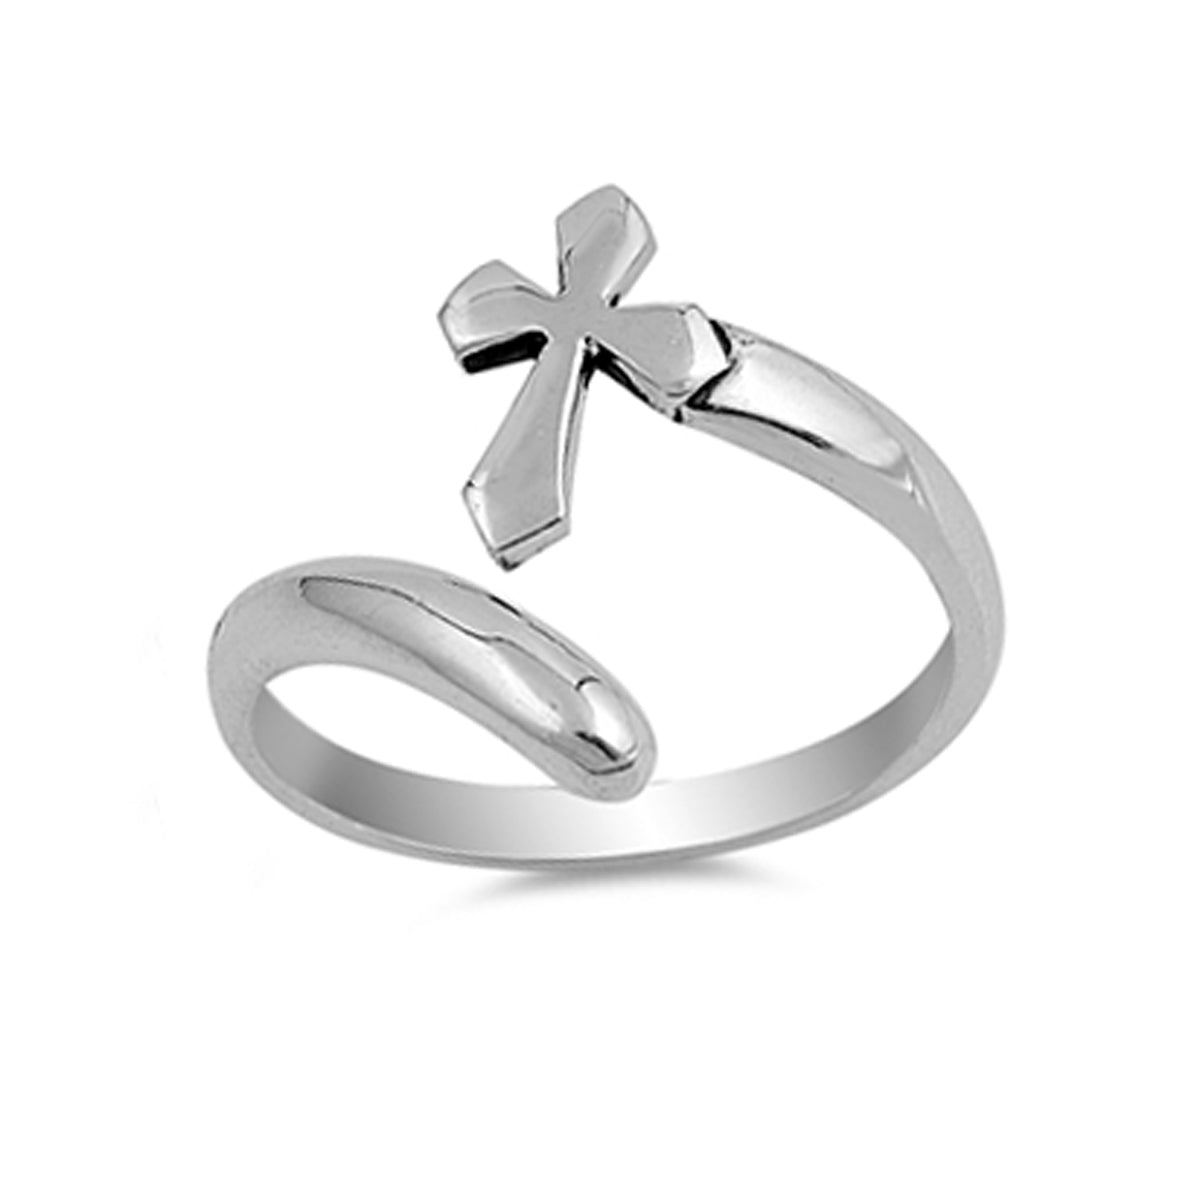 Calvary Cross Ring Sterling Silver Jewelry